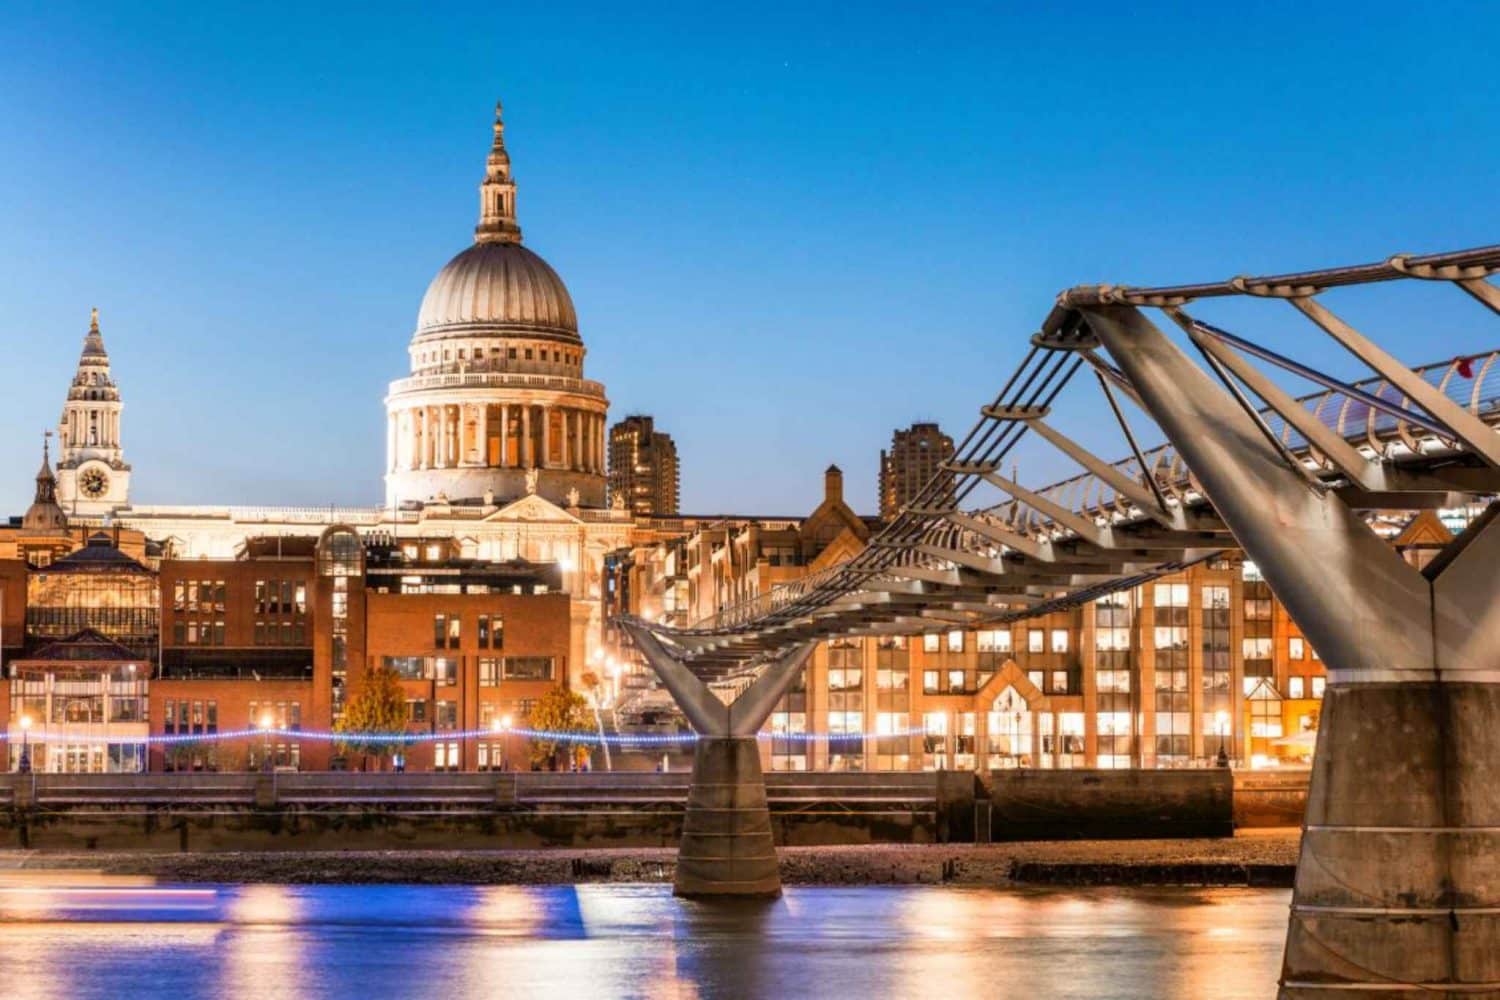 St Paul's Cathedral and Millennium Bridge are great sights to see during 24 hours in London